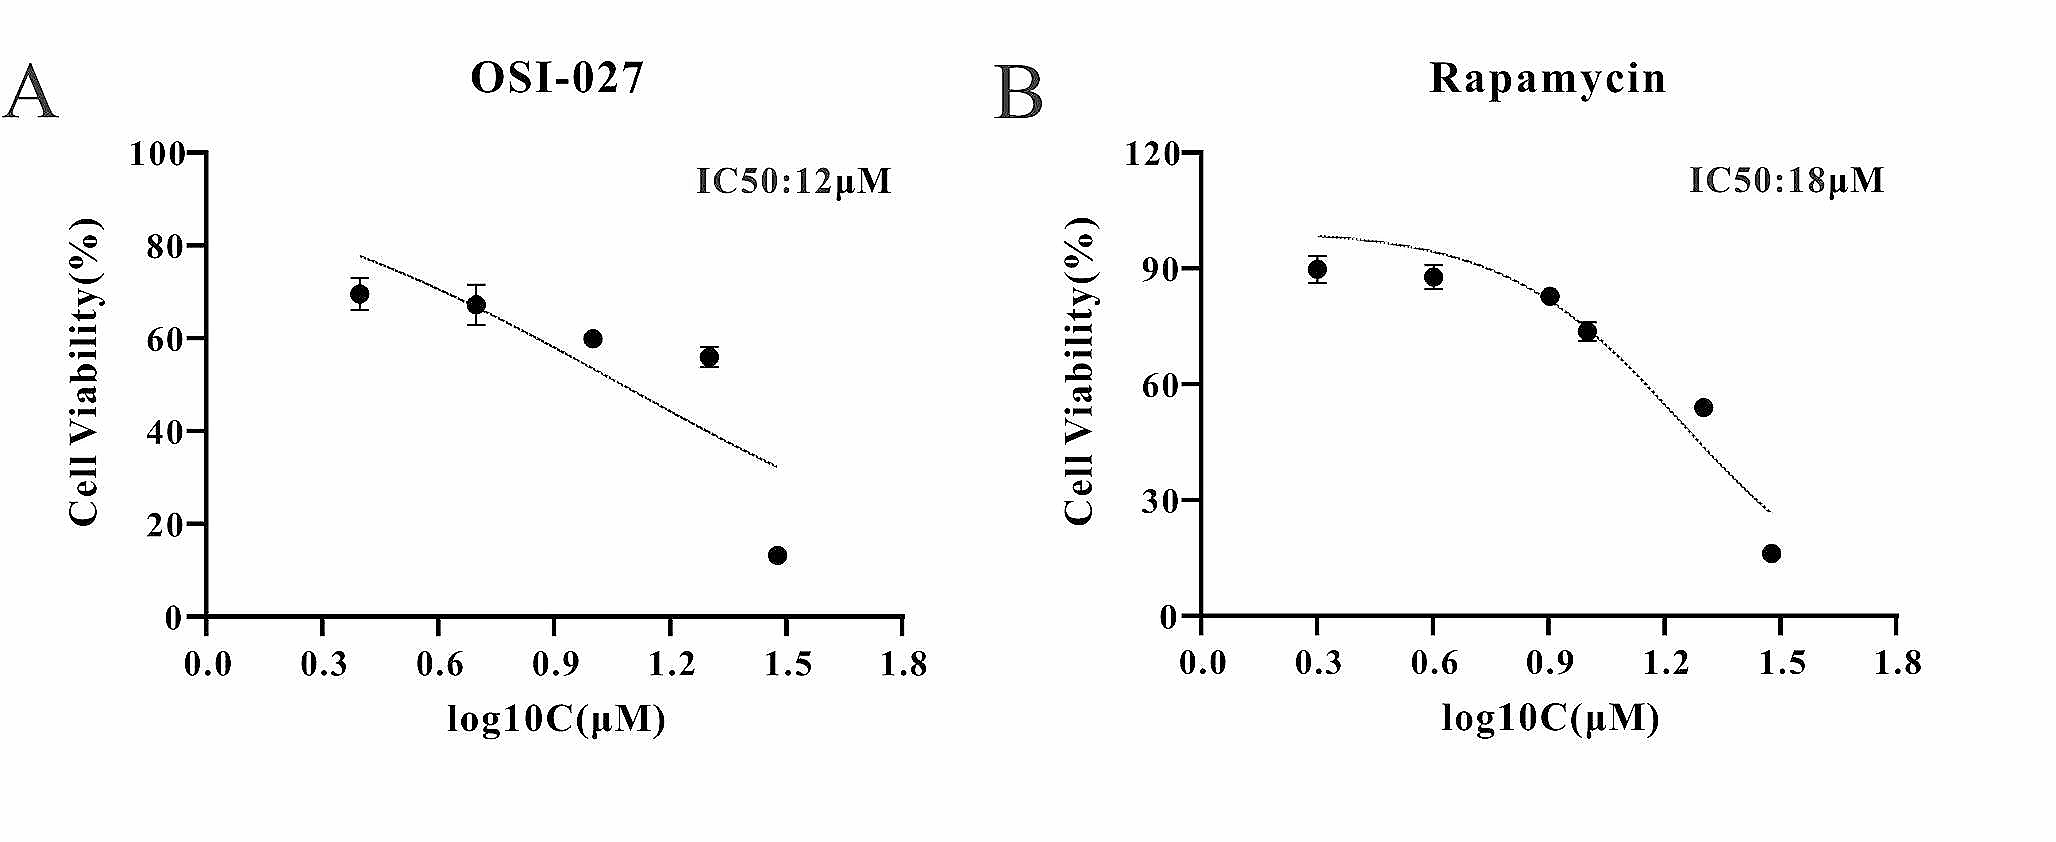 Study on the effects of rapamycin and the mTORC1/2 dual inhibitor OSI-027 on the metabolism of colon cancer cells based on UPLC-MS/MS metabolomics